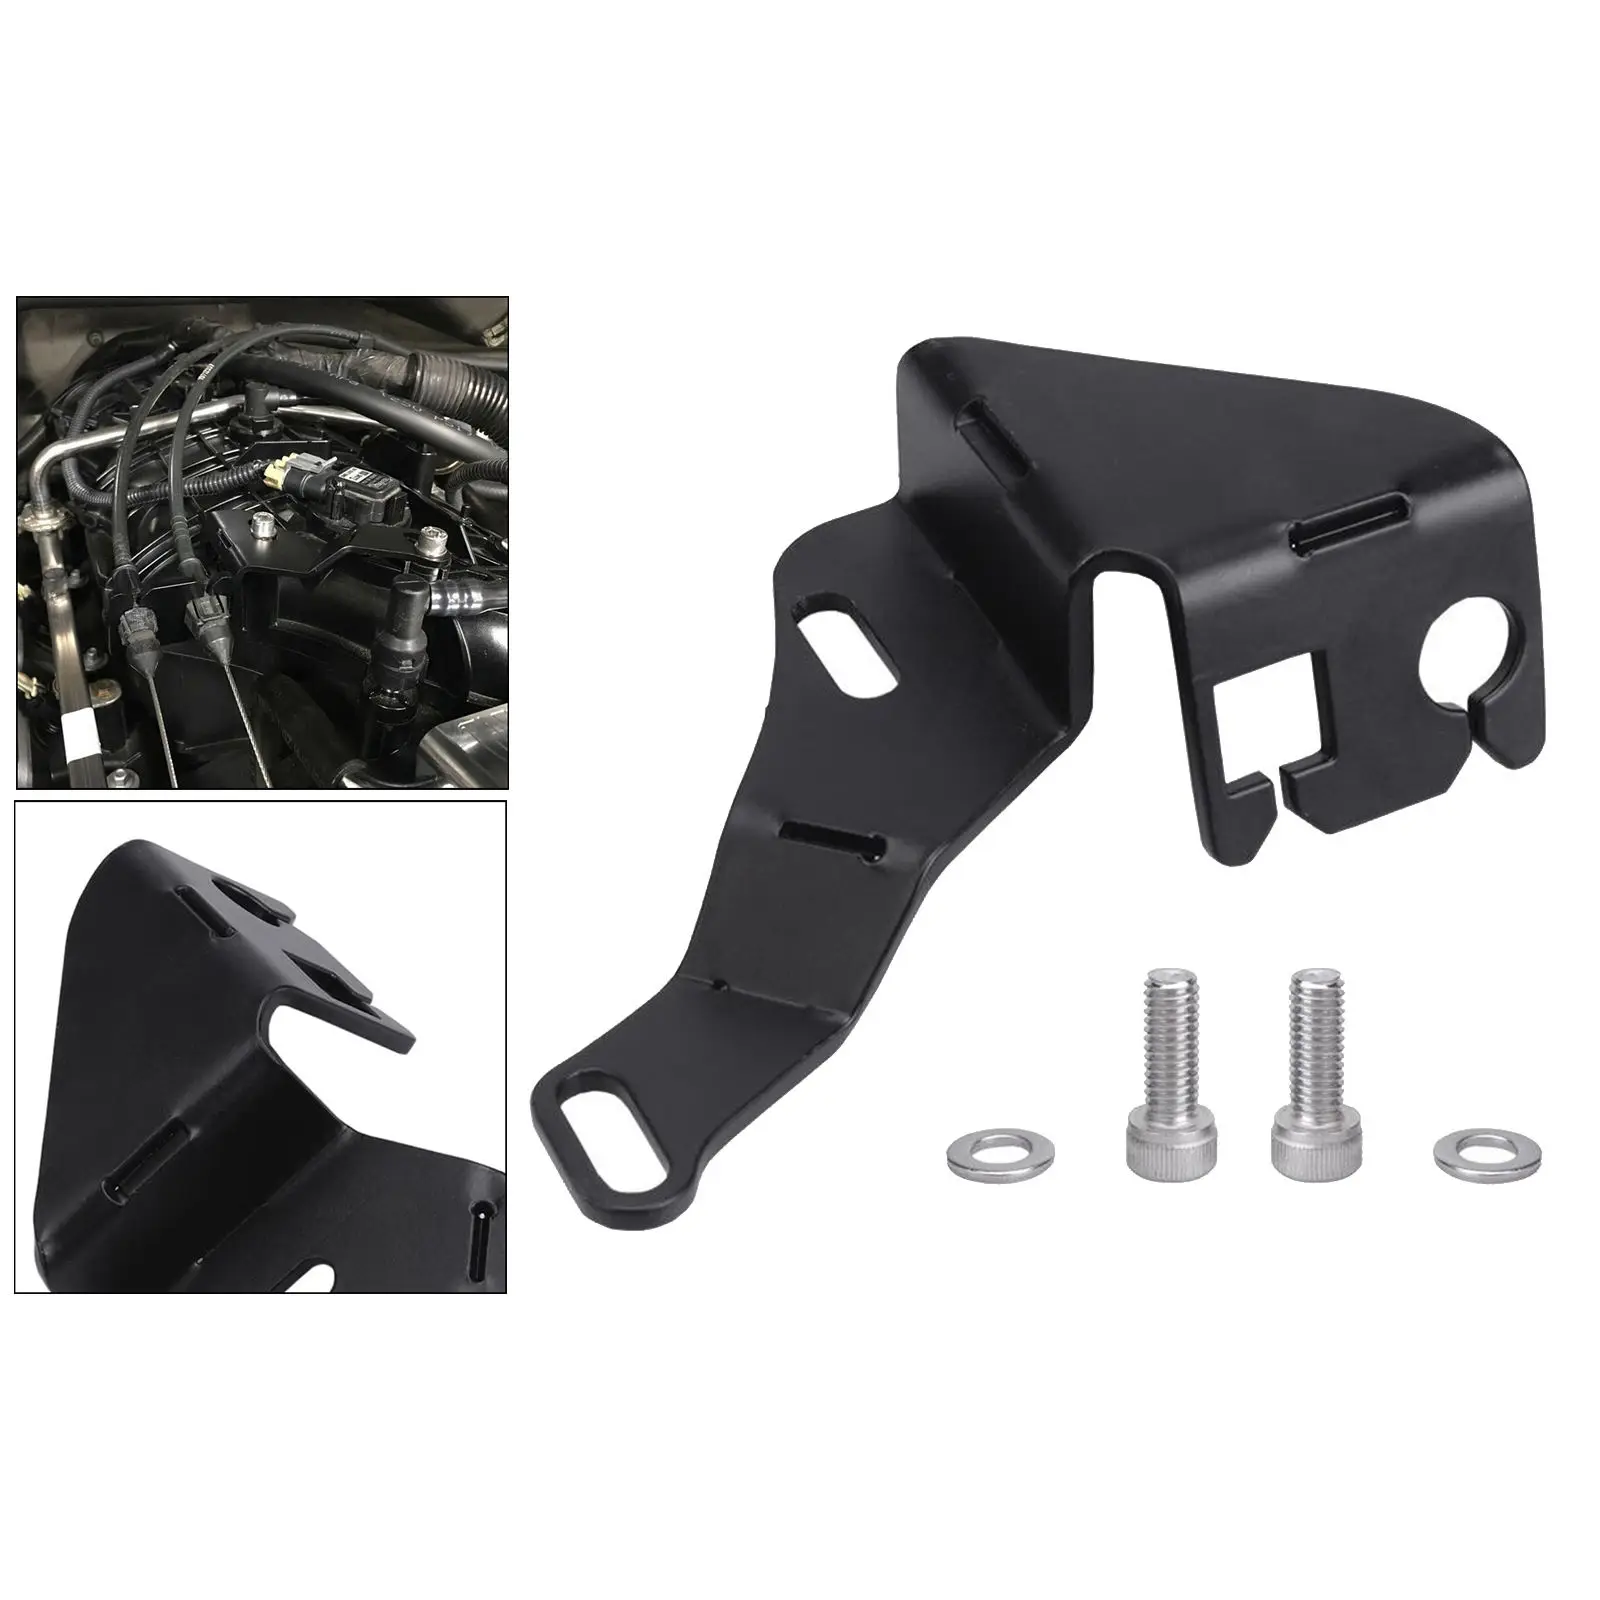 Professional Intake Manifold Throttle Cable Bracket Replaces fits for TBSS/NNBS/L92,Strong Material